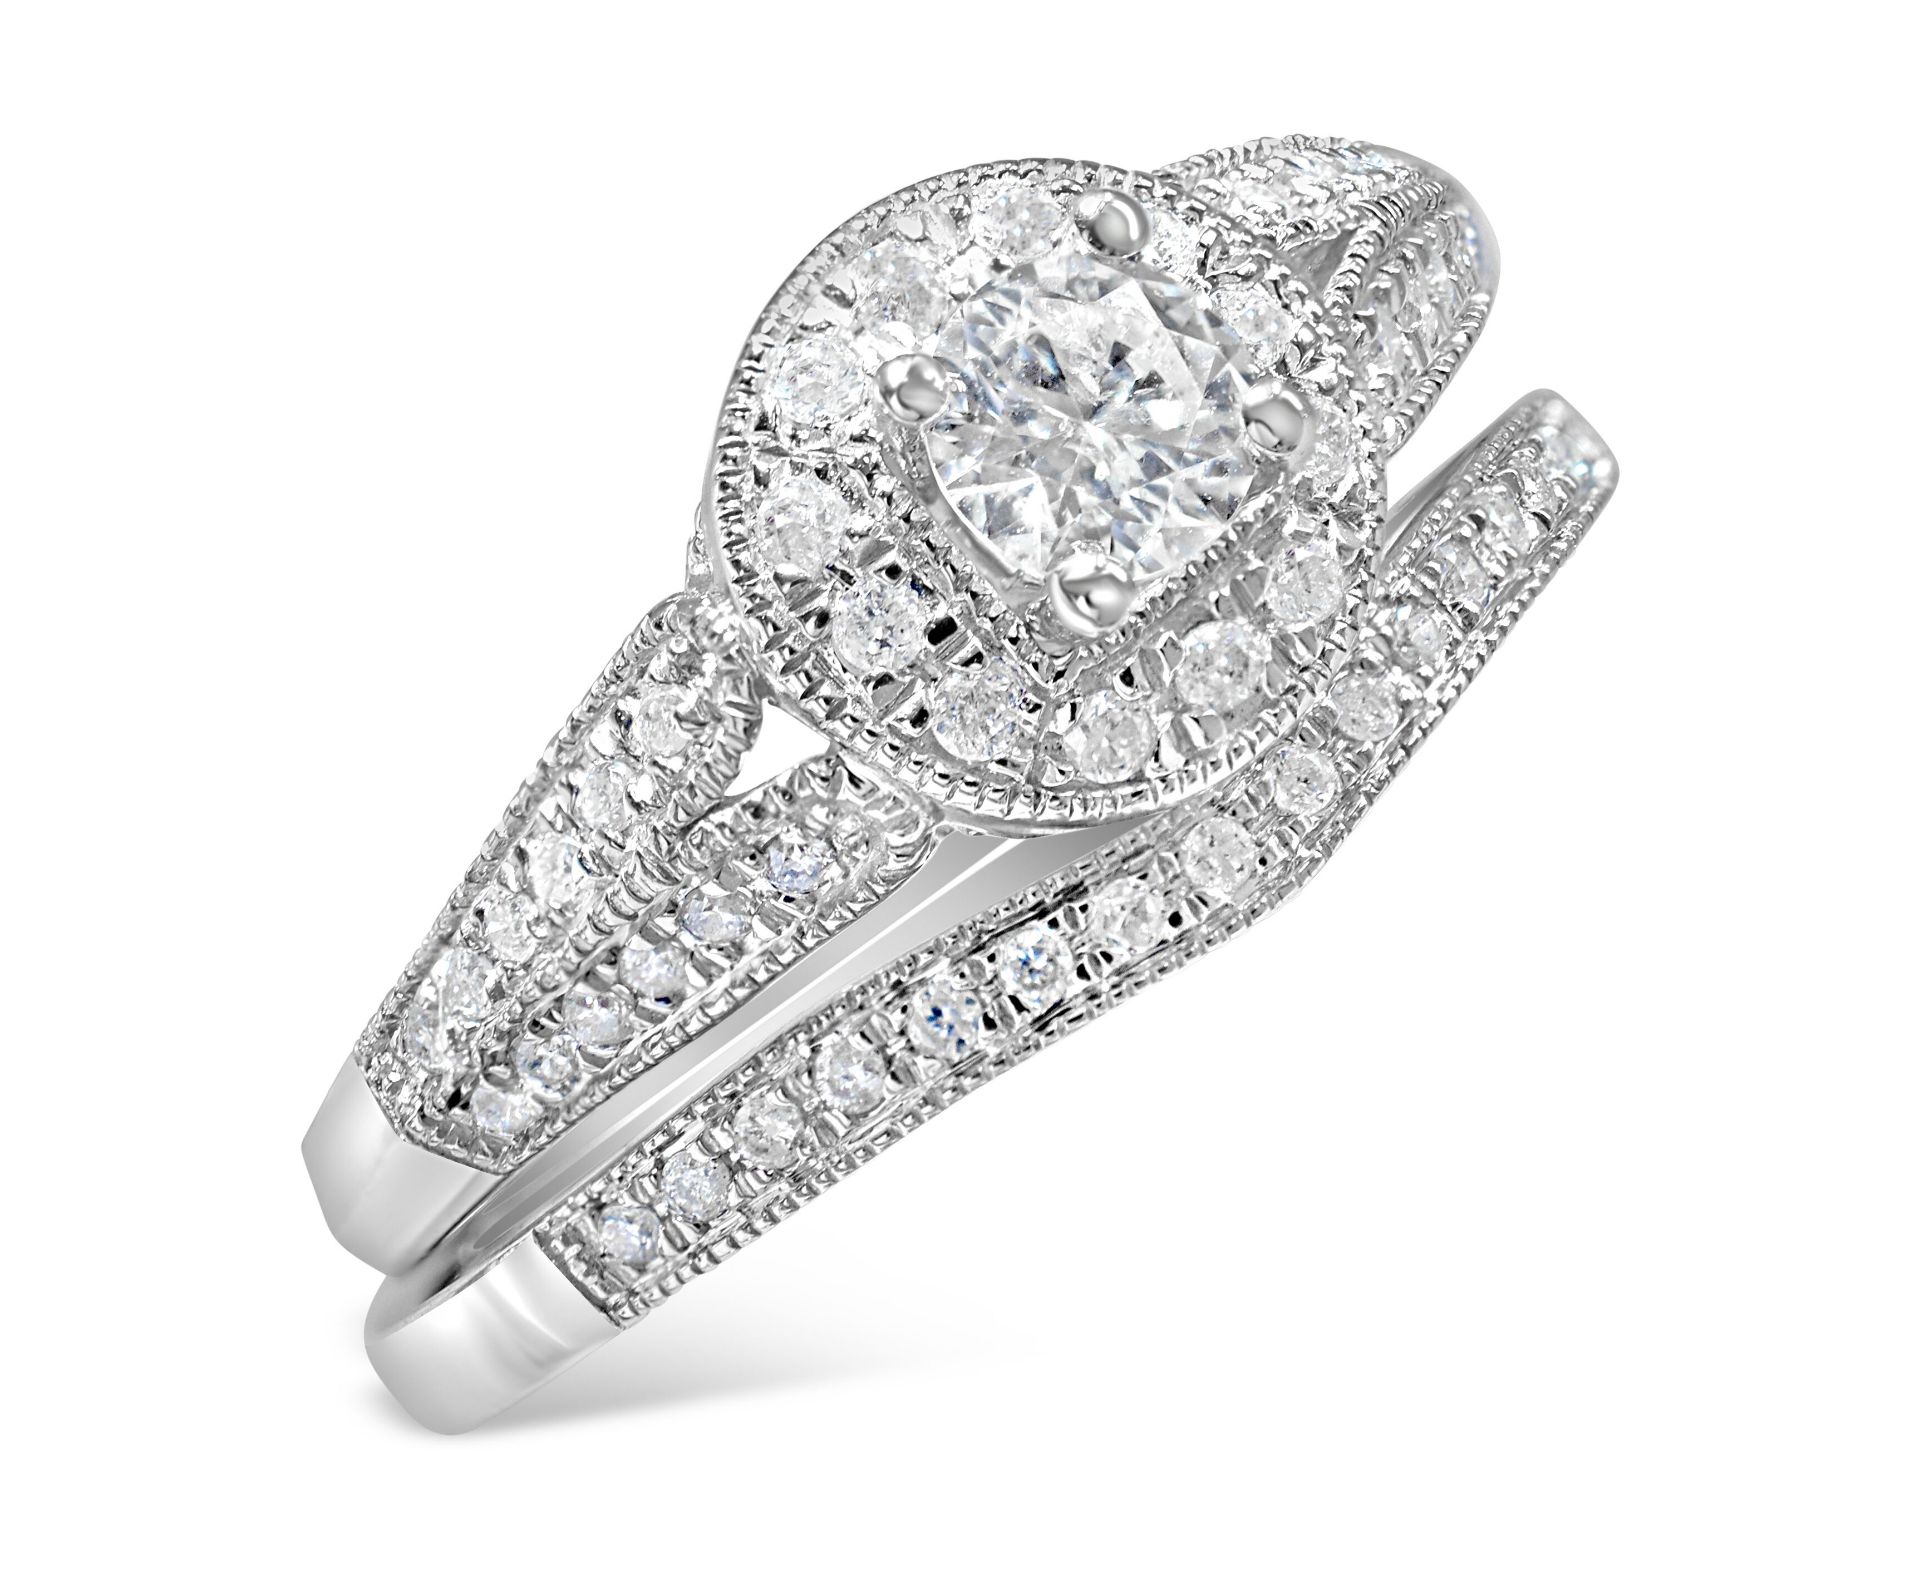 Bridal Set Of Diamond Engagement and Wedding 9ct White Gold Rings With Over 50 Diamonds In Total RRP